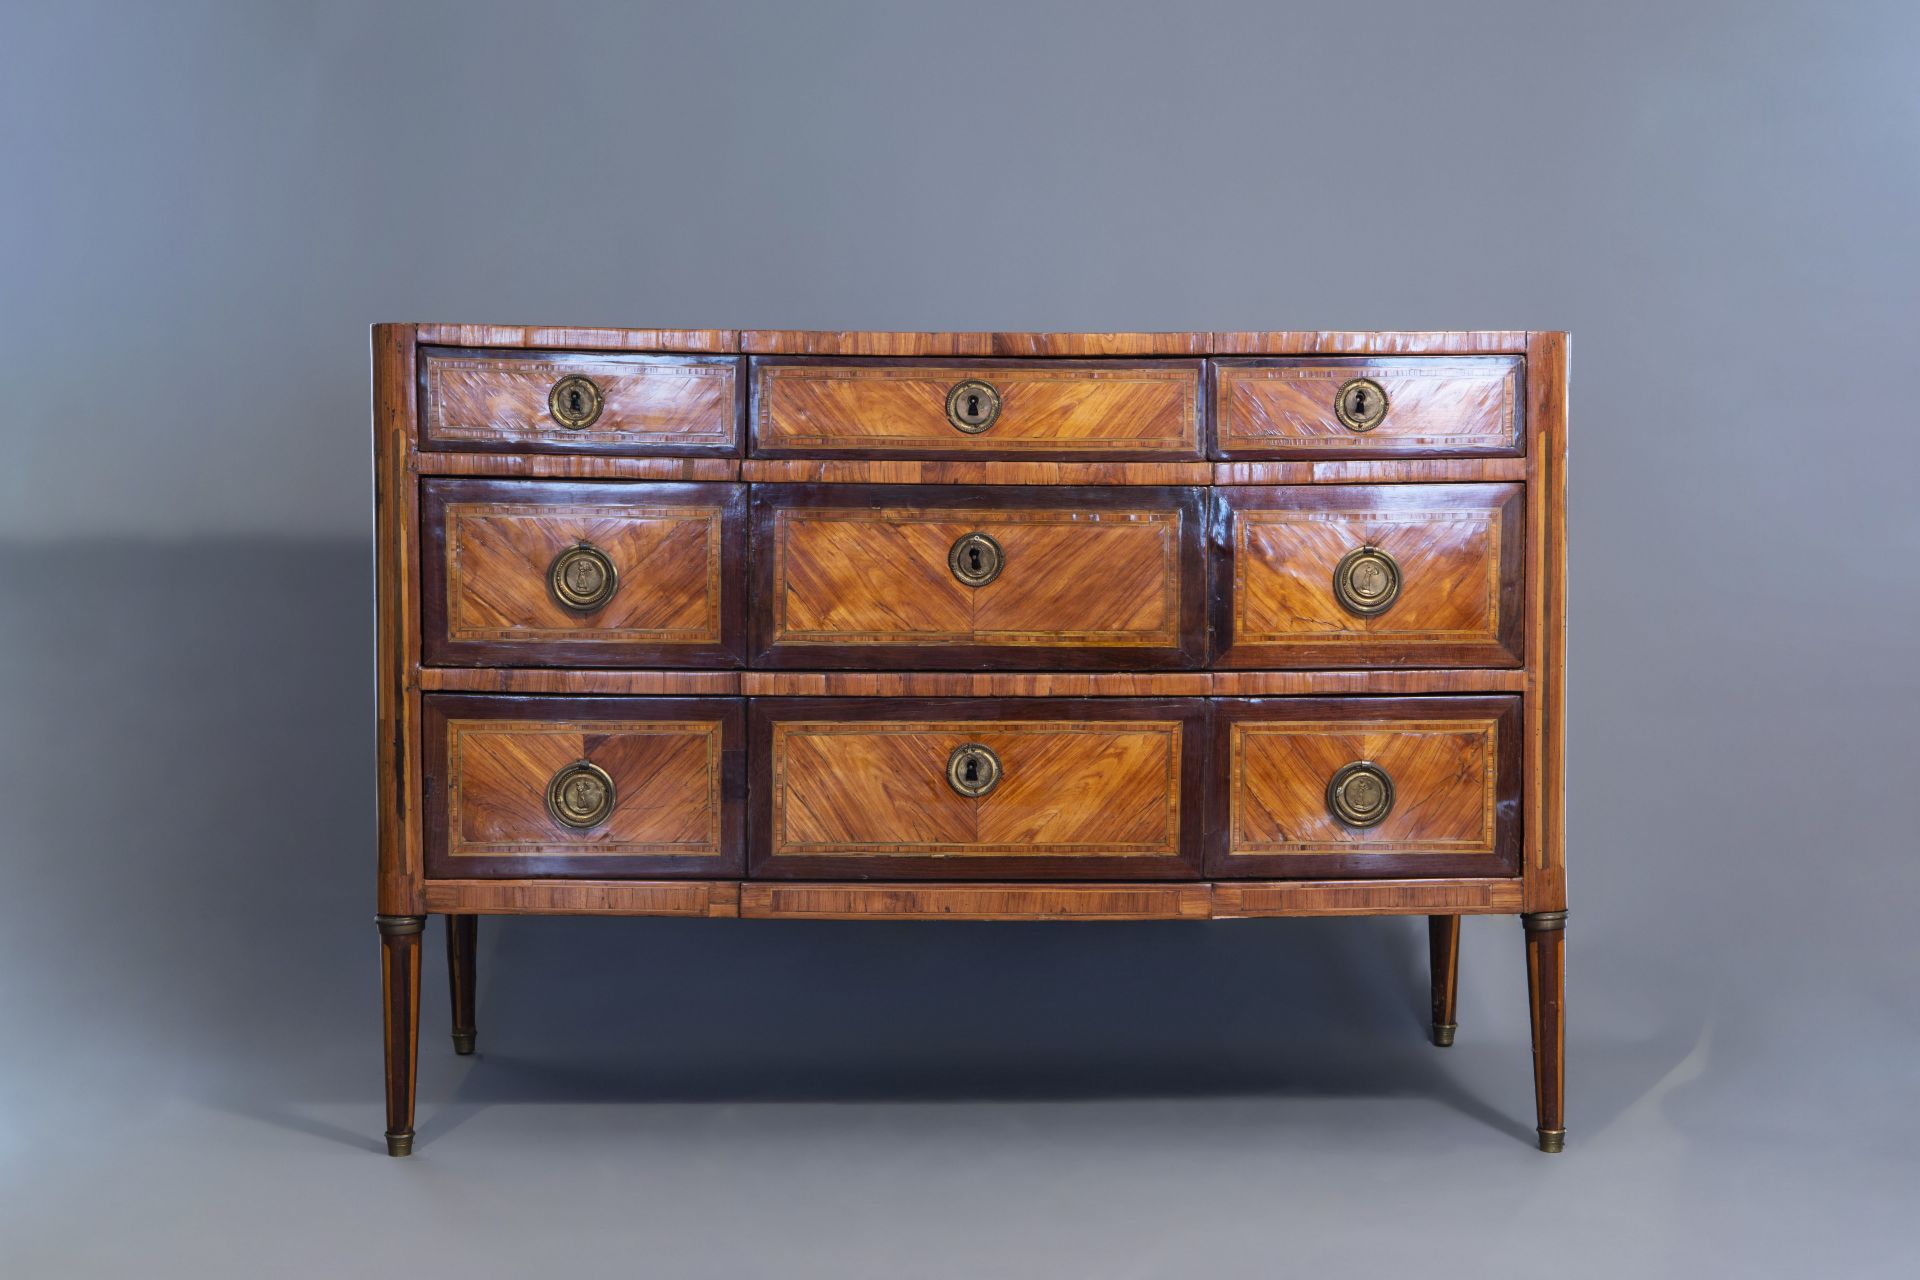 A French mahogany veneered Louis XVI chest of drawers with marble top, late 18th C. - Image 2 of 11